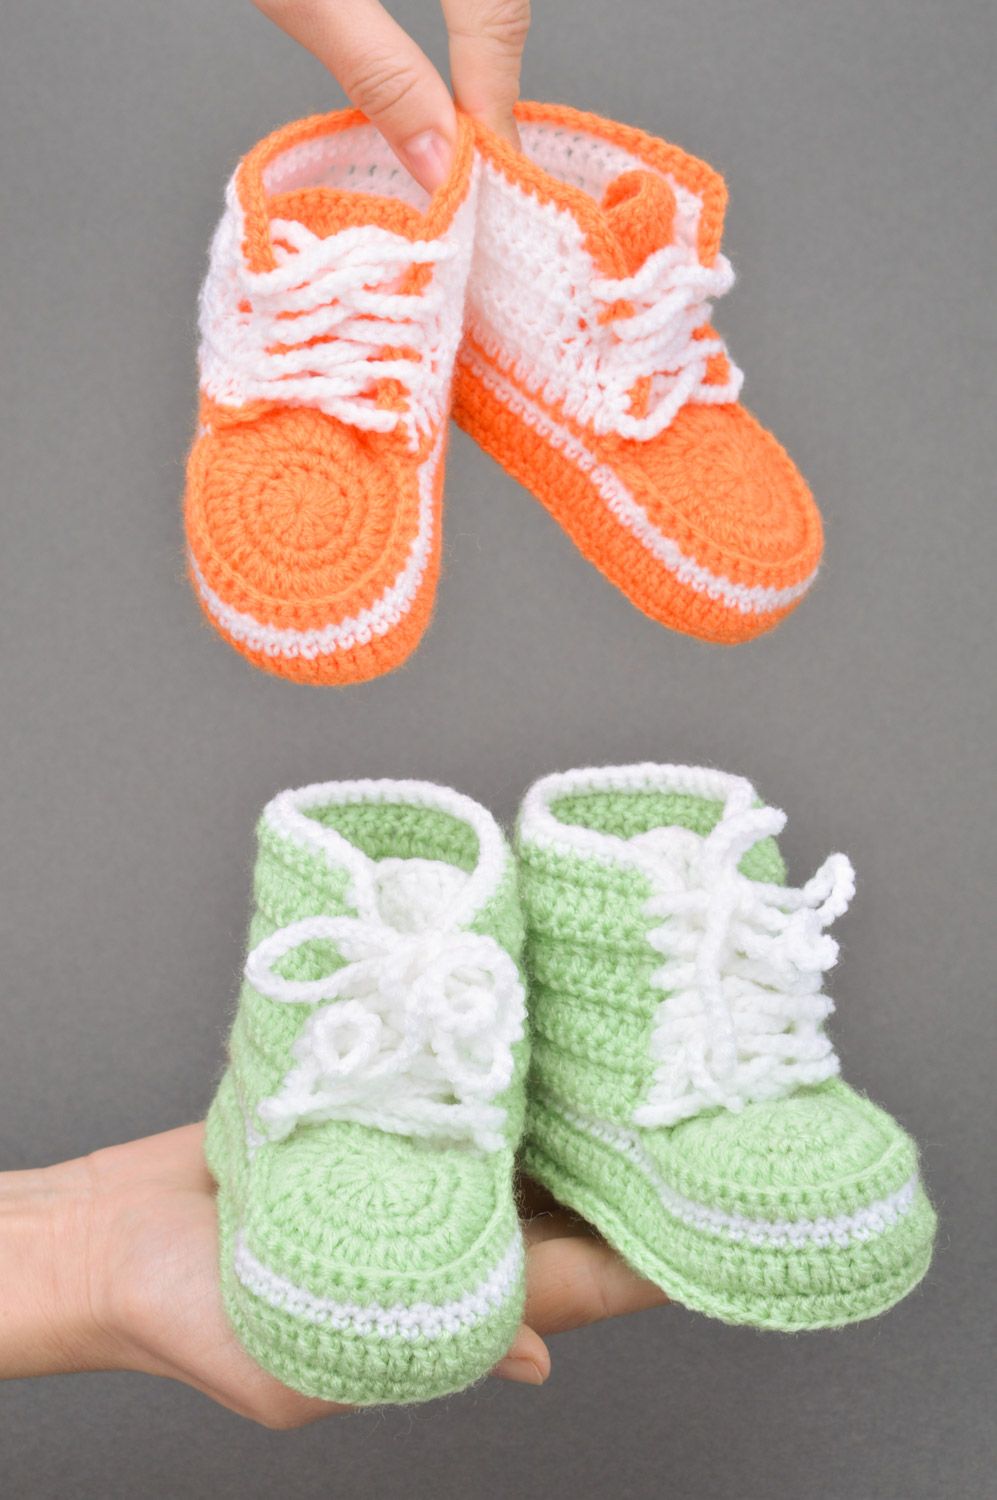 A set of handmade crocheted baby booties two pairs of light green and orange colors photo 3